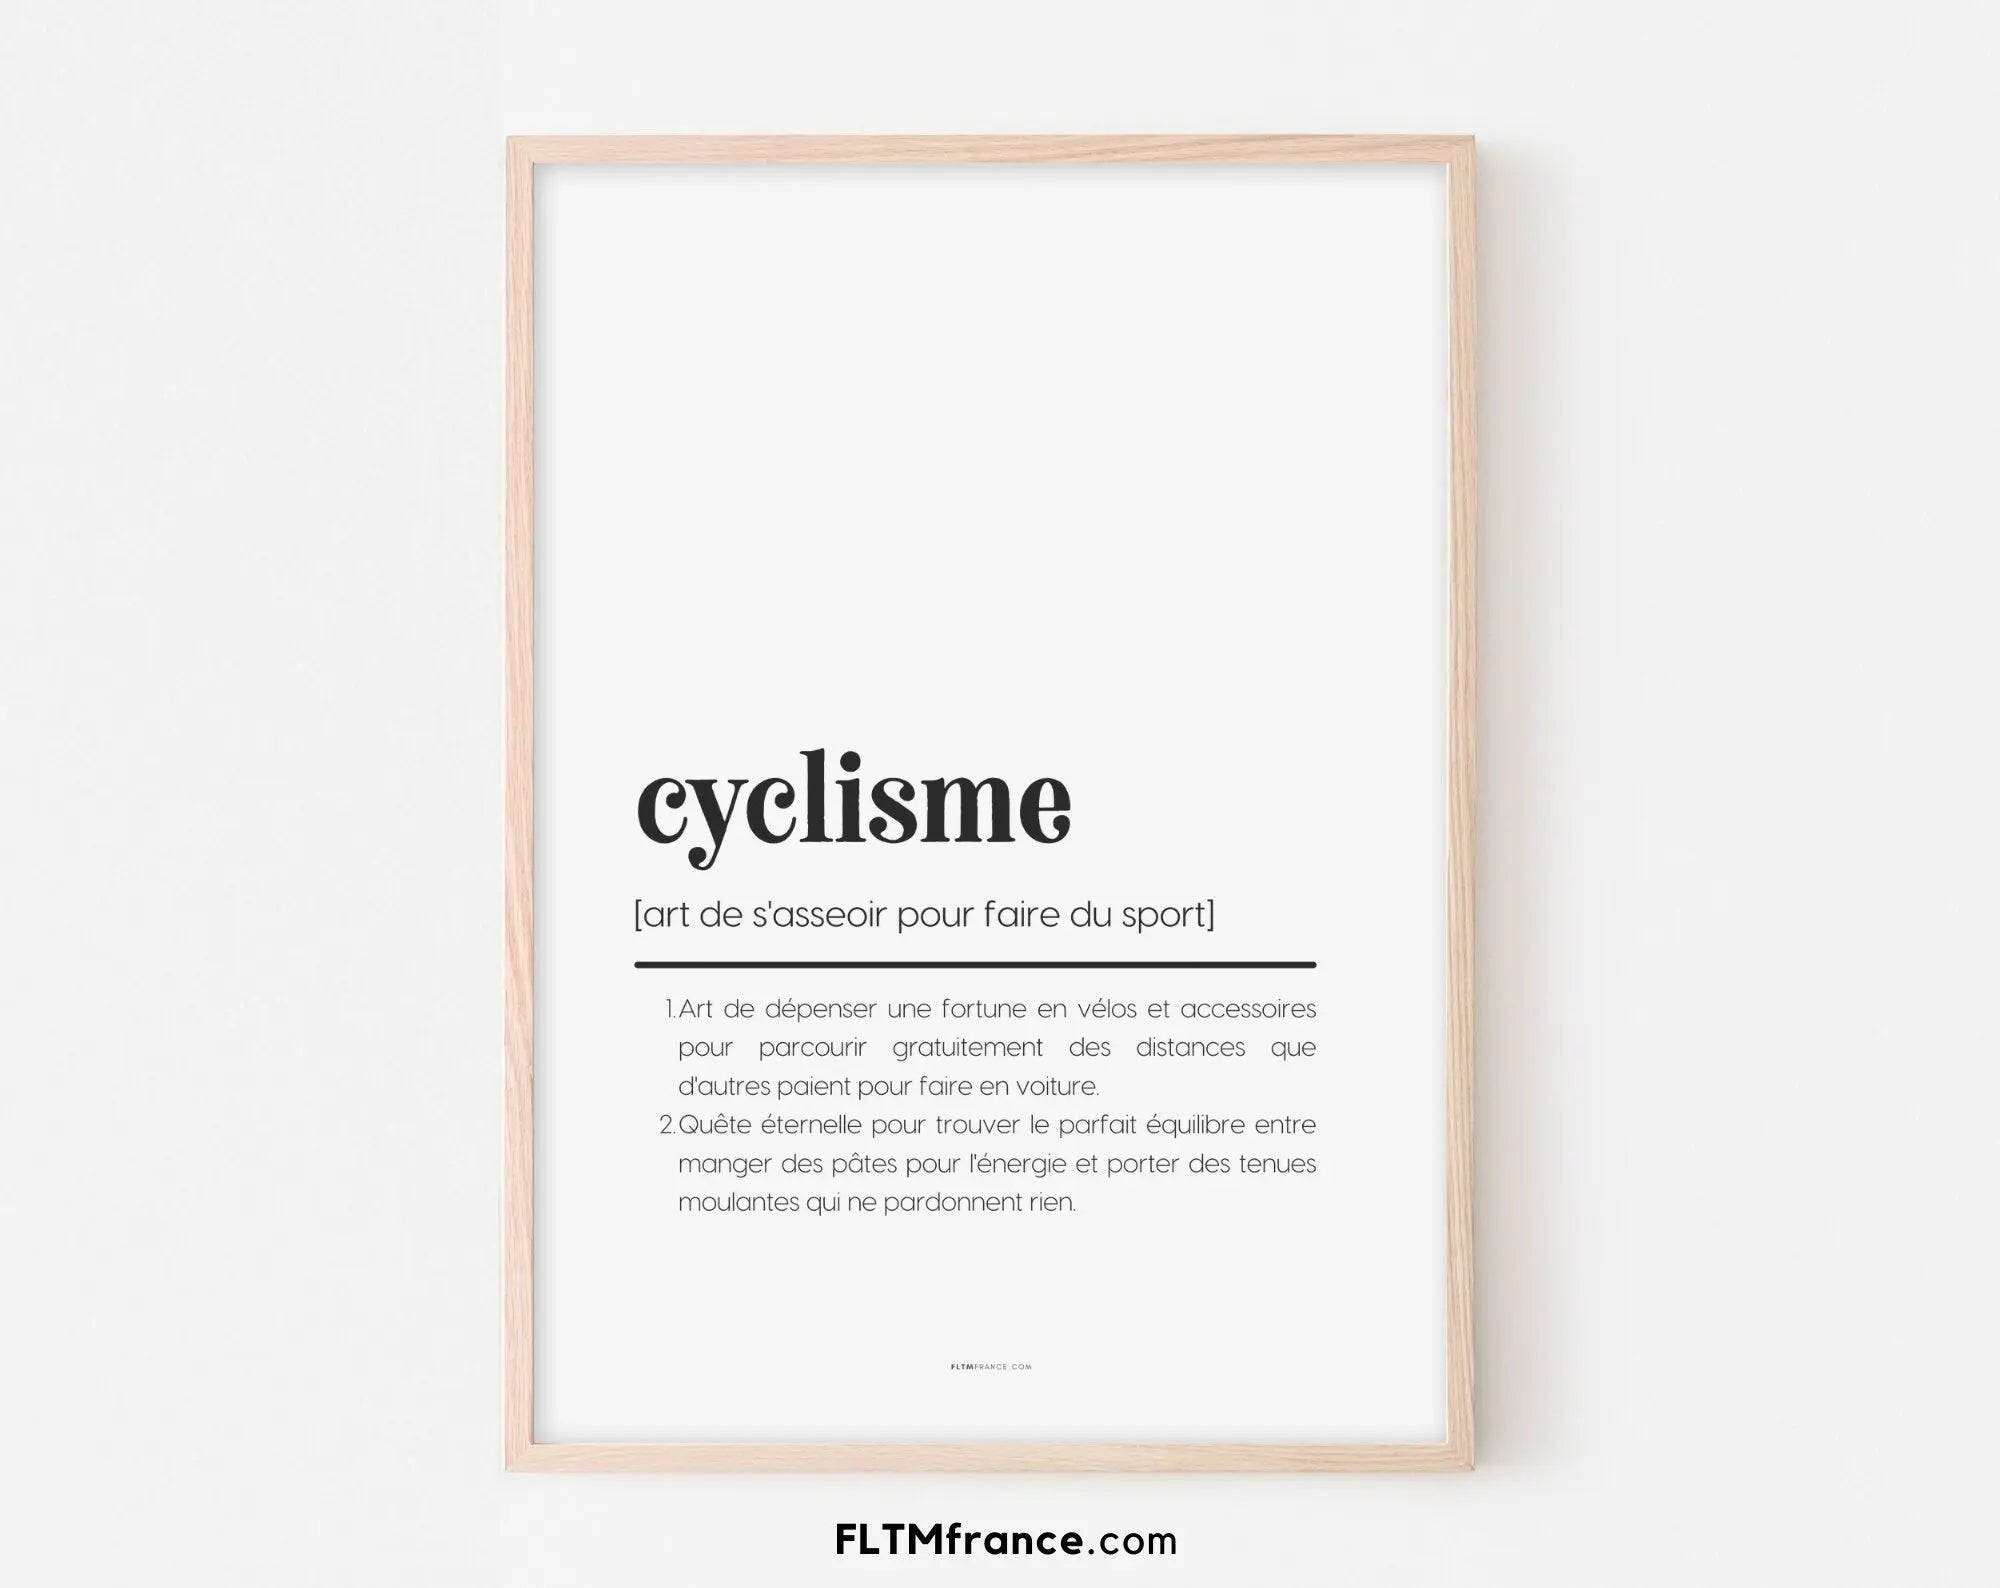 Cycling definition poster - Sport humor definition poster